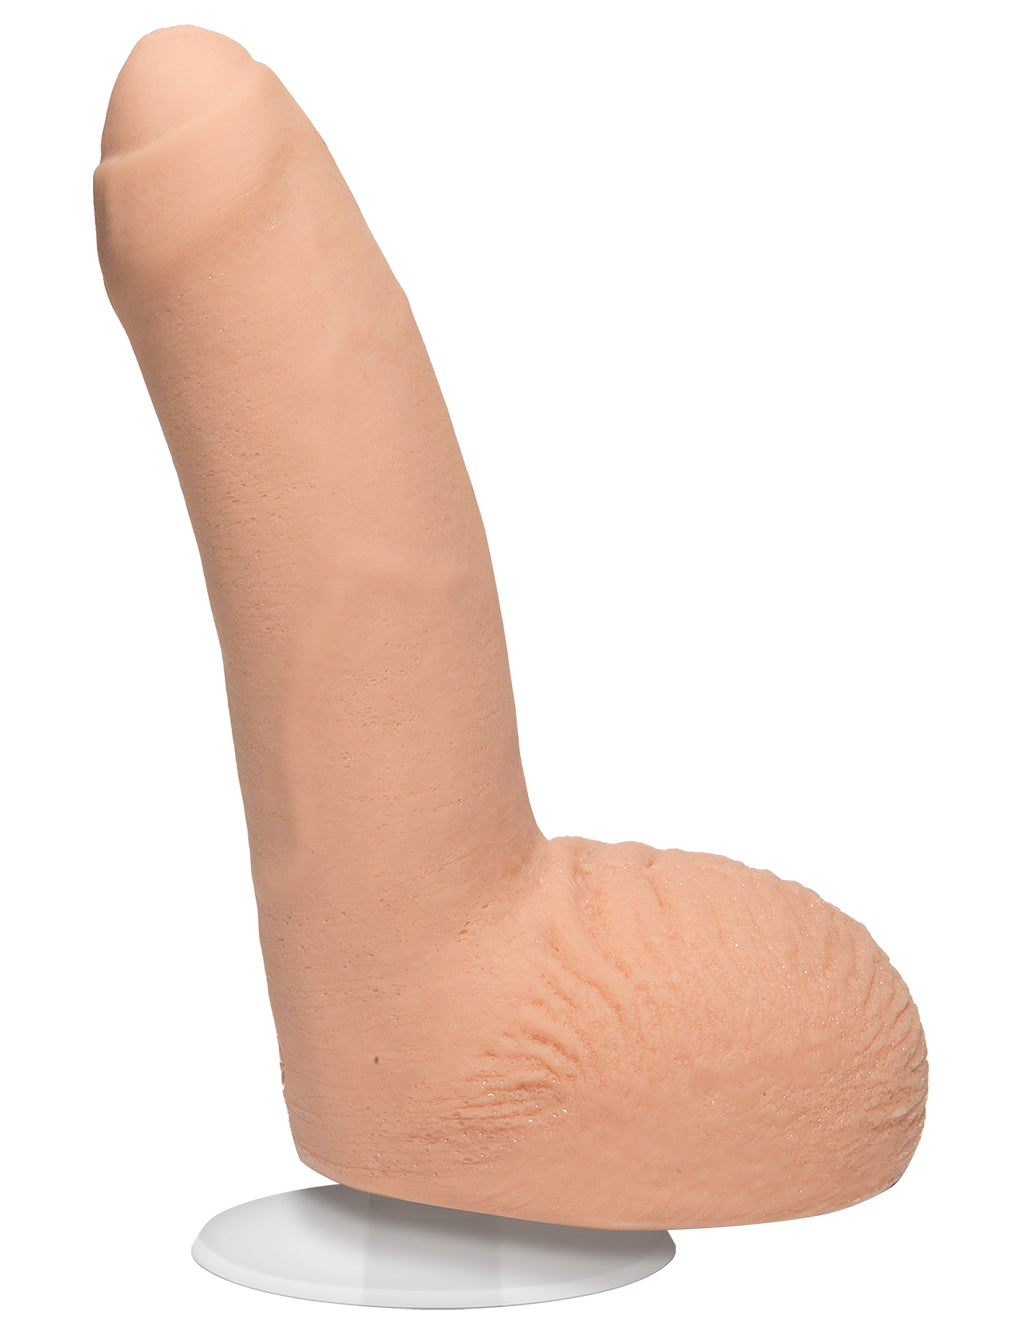 Signature Cocks William Seed Ultraskyn 8 Inch Cock- front